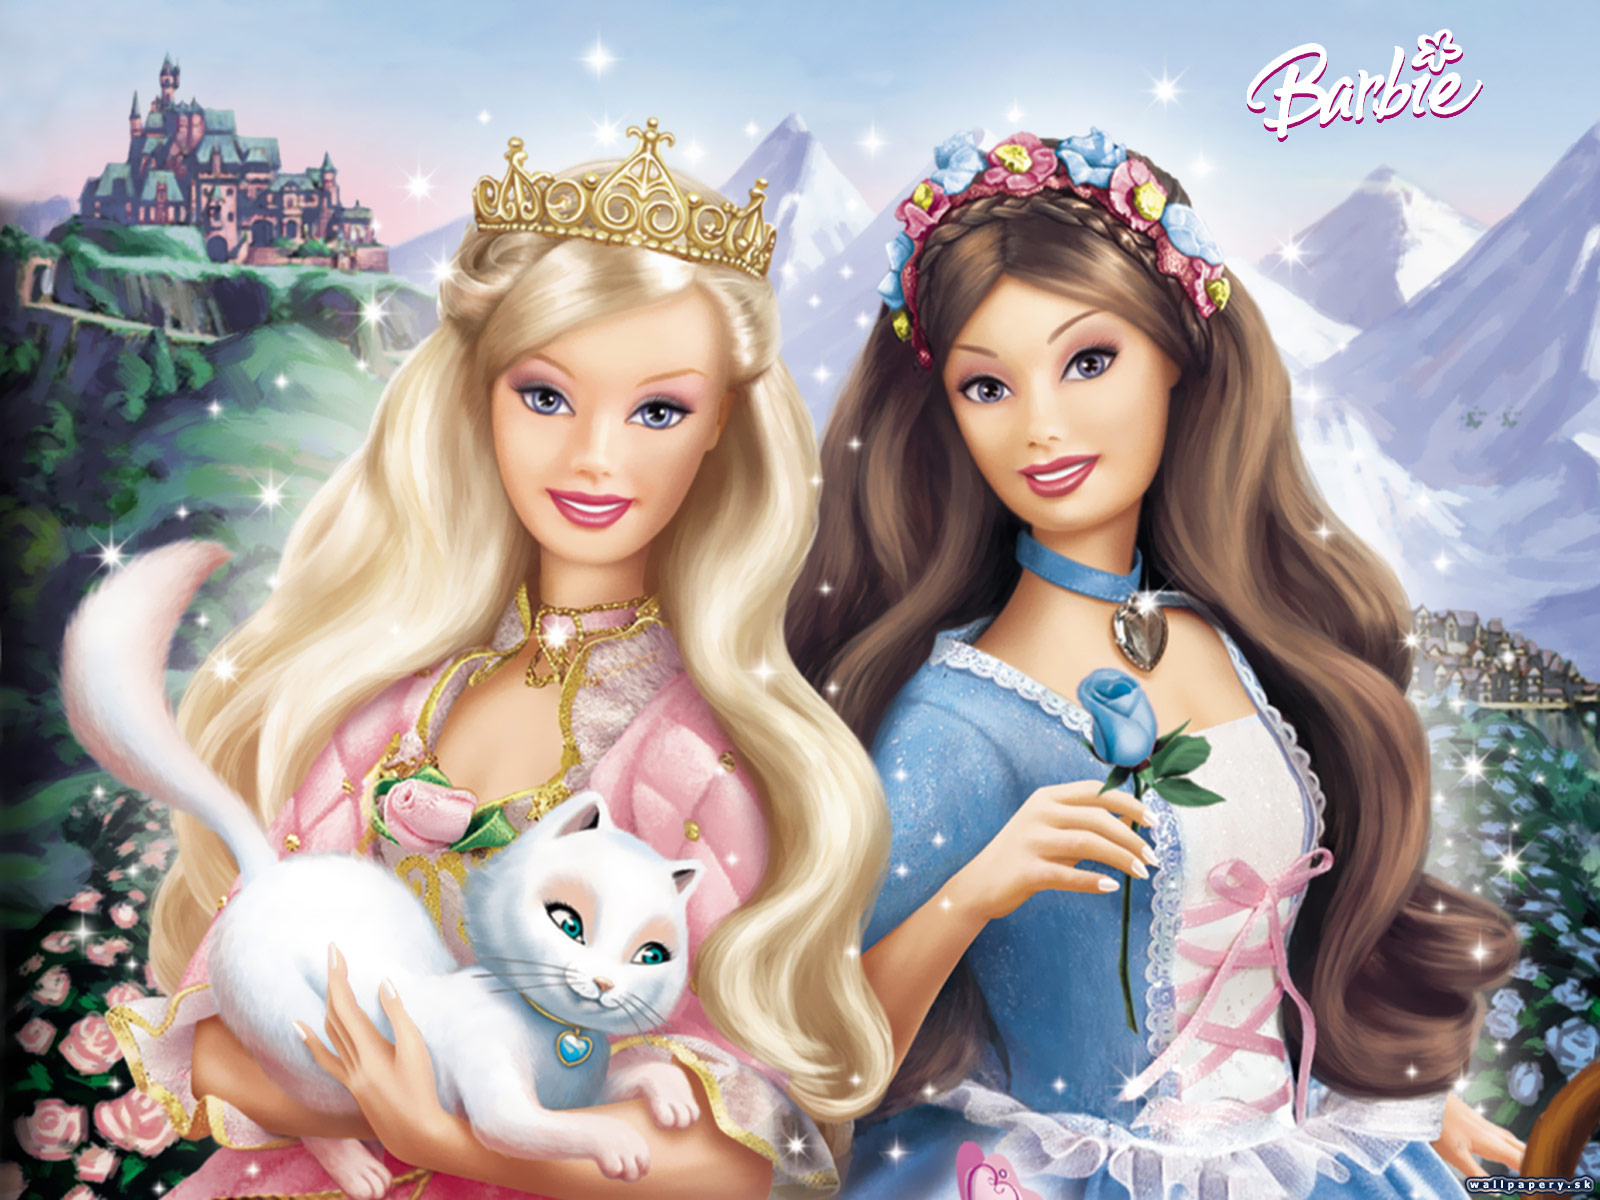 Barbie as the Princess and the Pauper - wallpaper 1 | ABCgames.cz